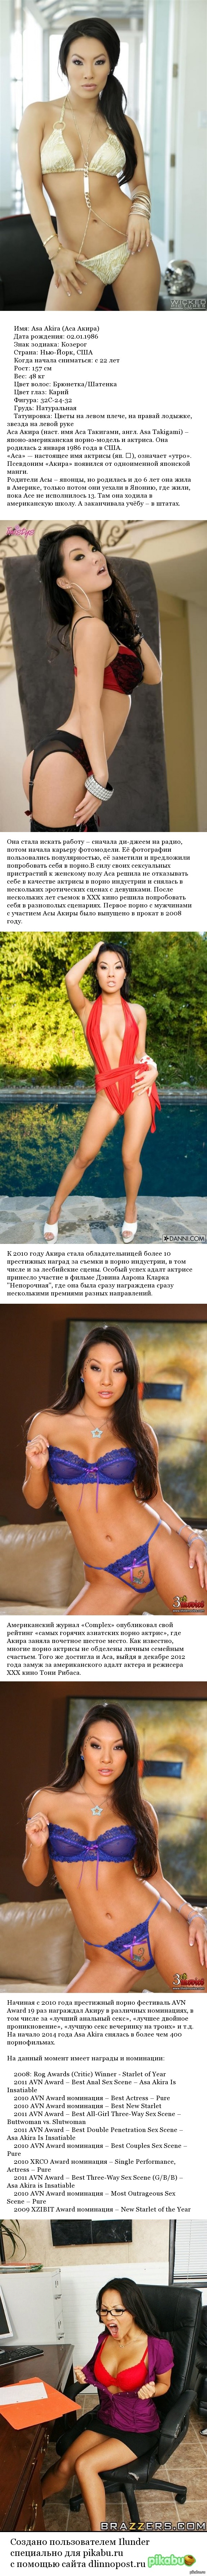 The second post is about the biography of pornographic actresses, this time Asa Akira. First post: - NSFW, Asian, Porn actress, Asa akira, Boobs, Longpost, Porn Actors and Porn Actresses